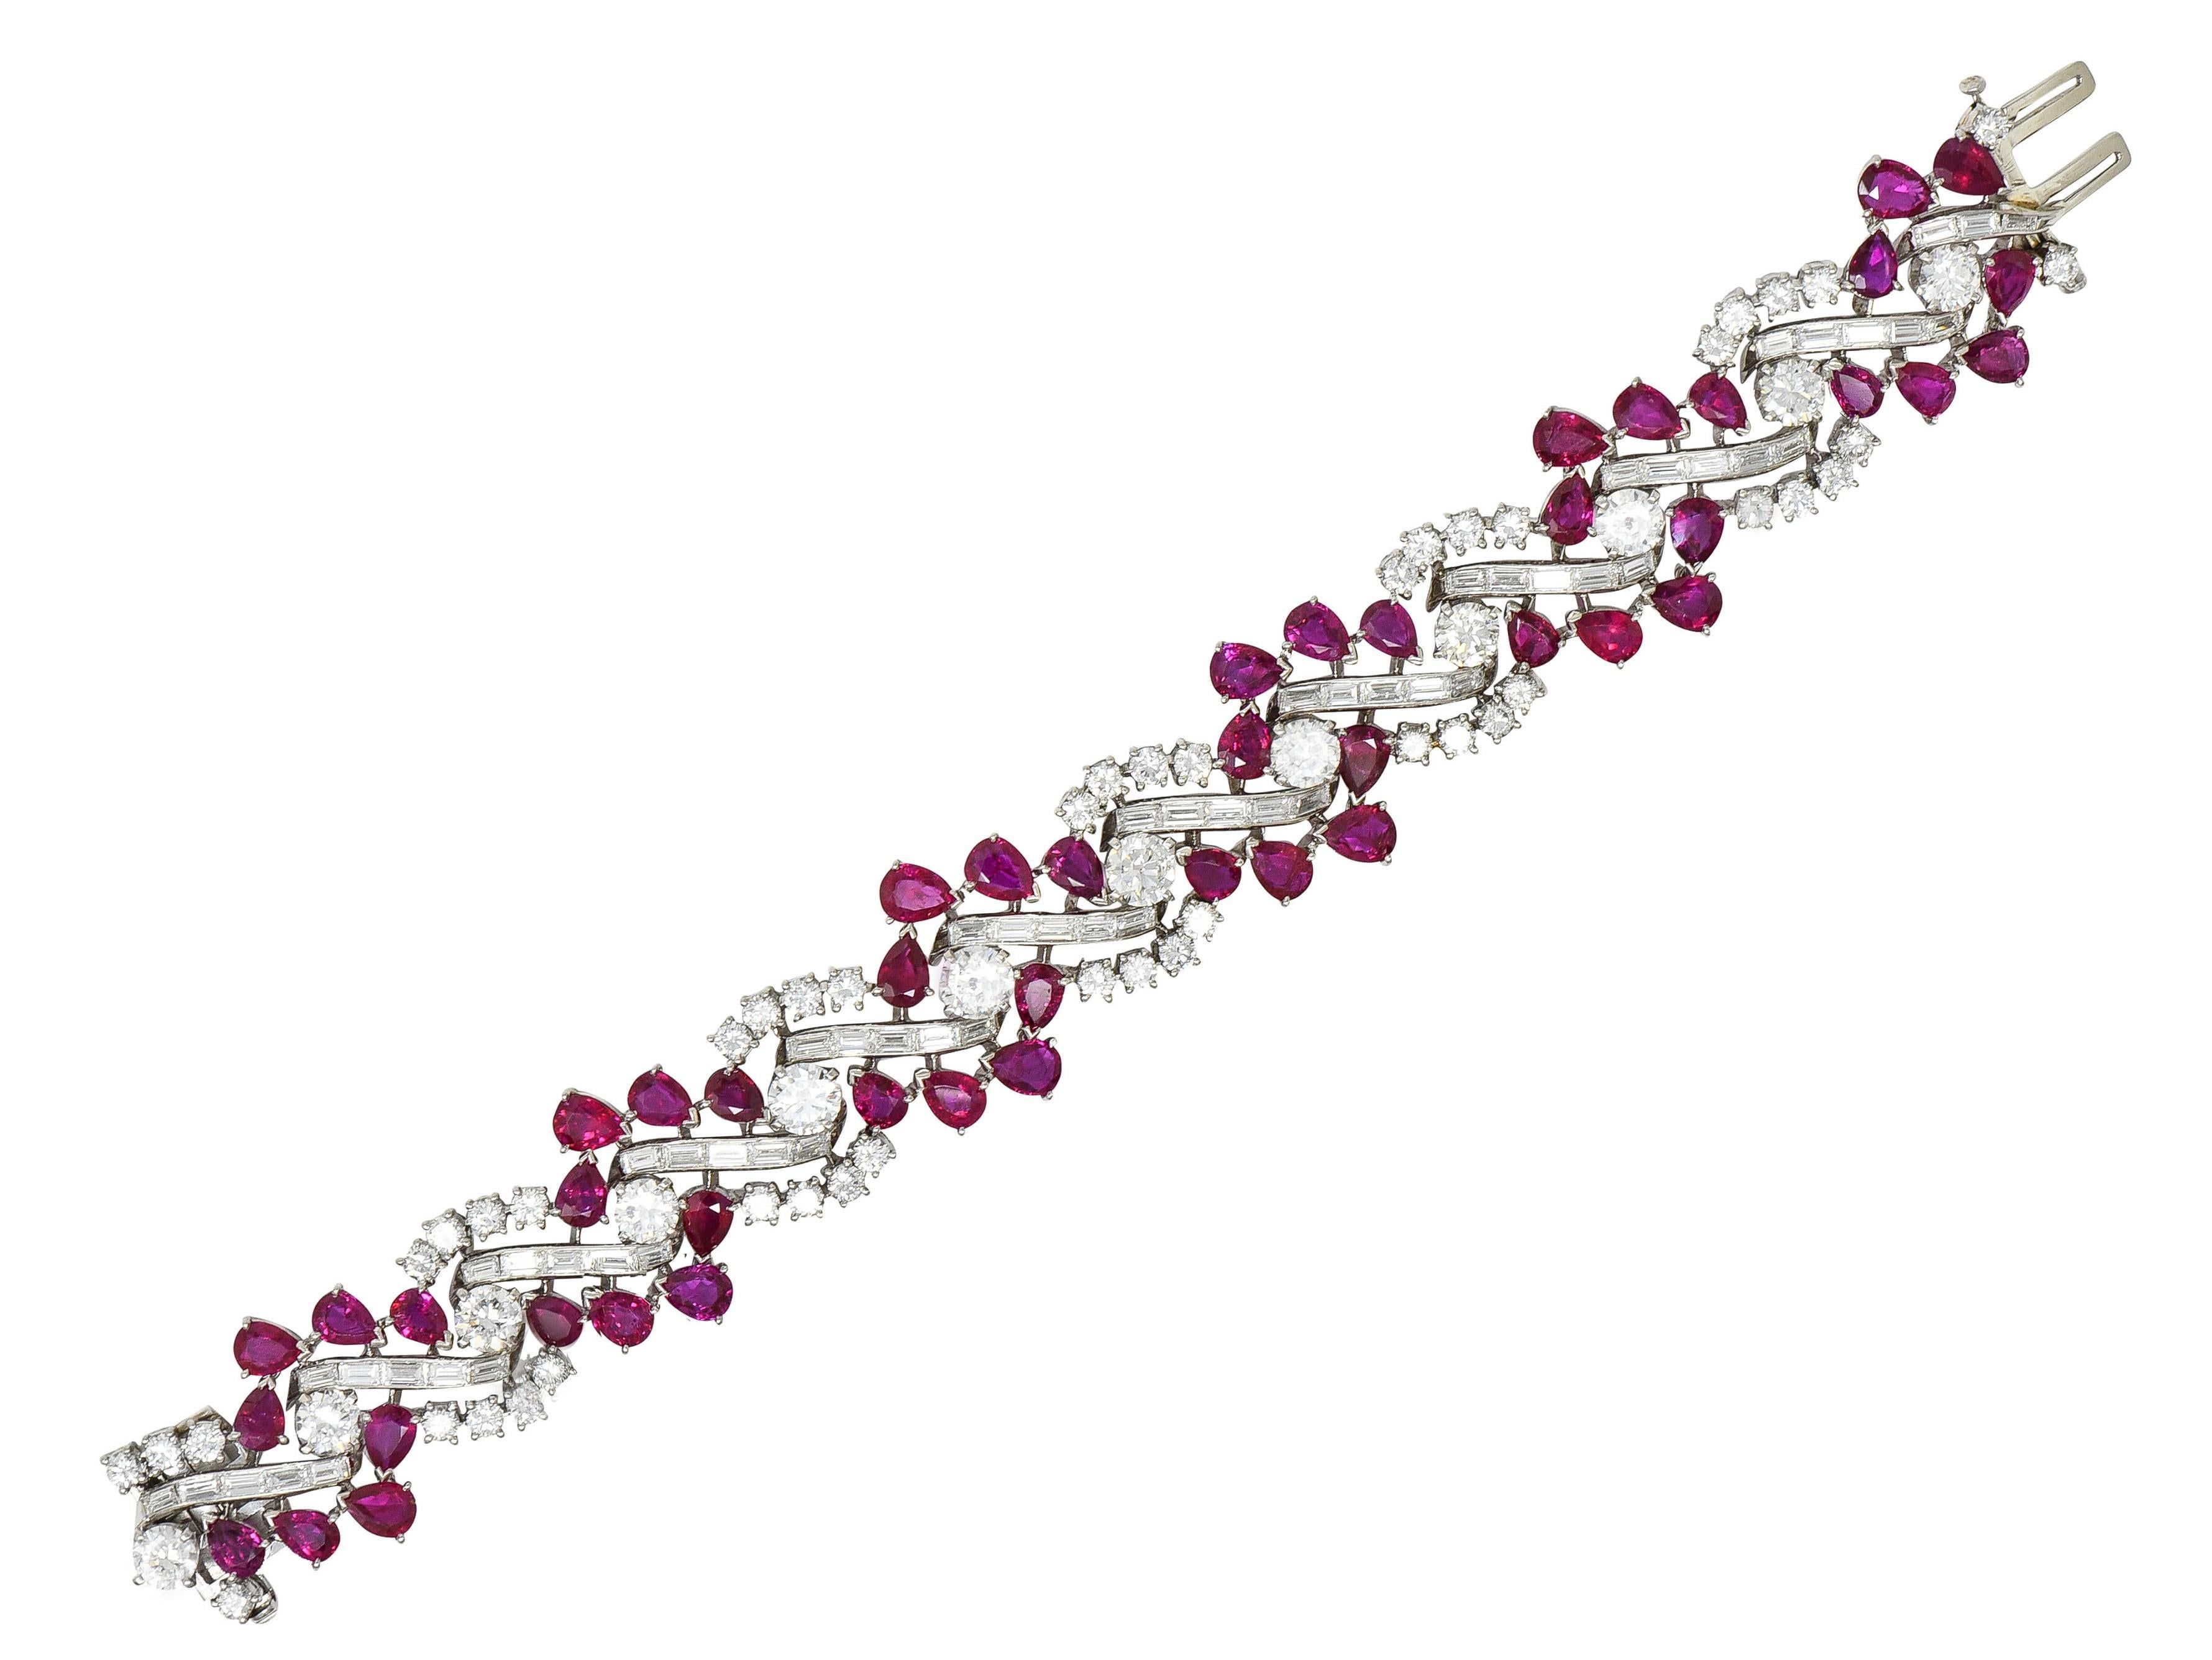 Comprised of hinged links prong set with rubies and diamonds as an undulating twist motif
Rubies are pear cut weighing approximately 29.60 carats total - well-matched red in color  
Natural Burmese in origin and displaying no indications of heat